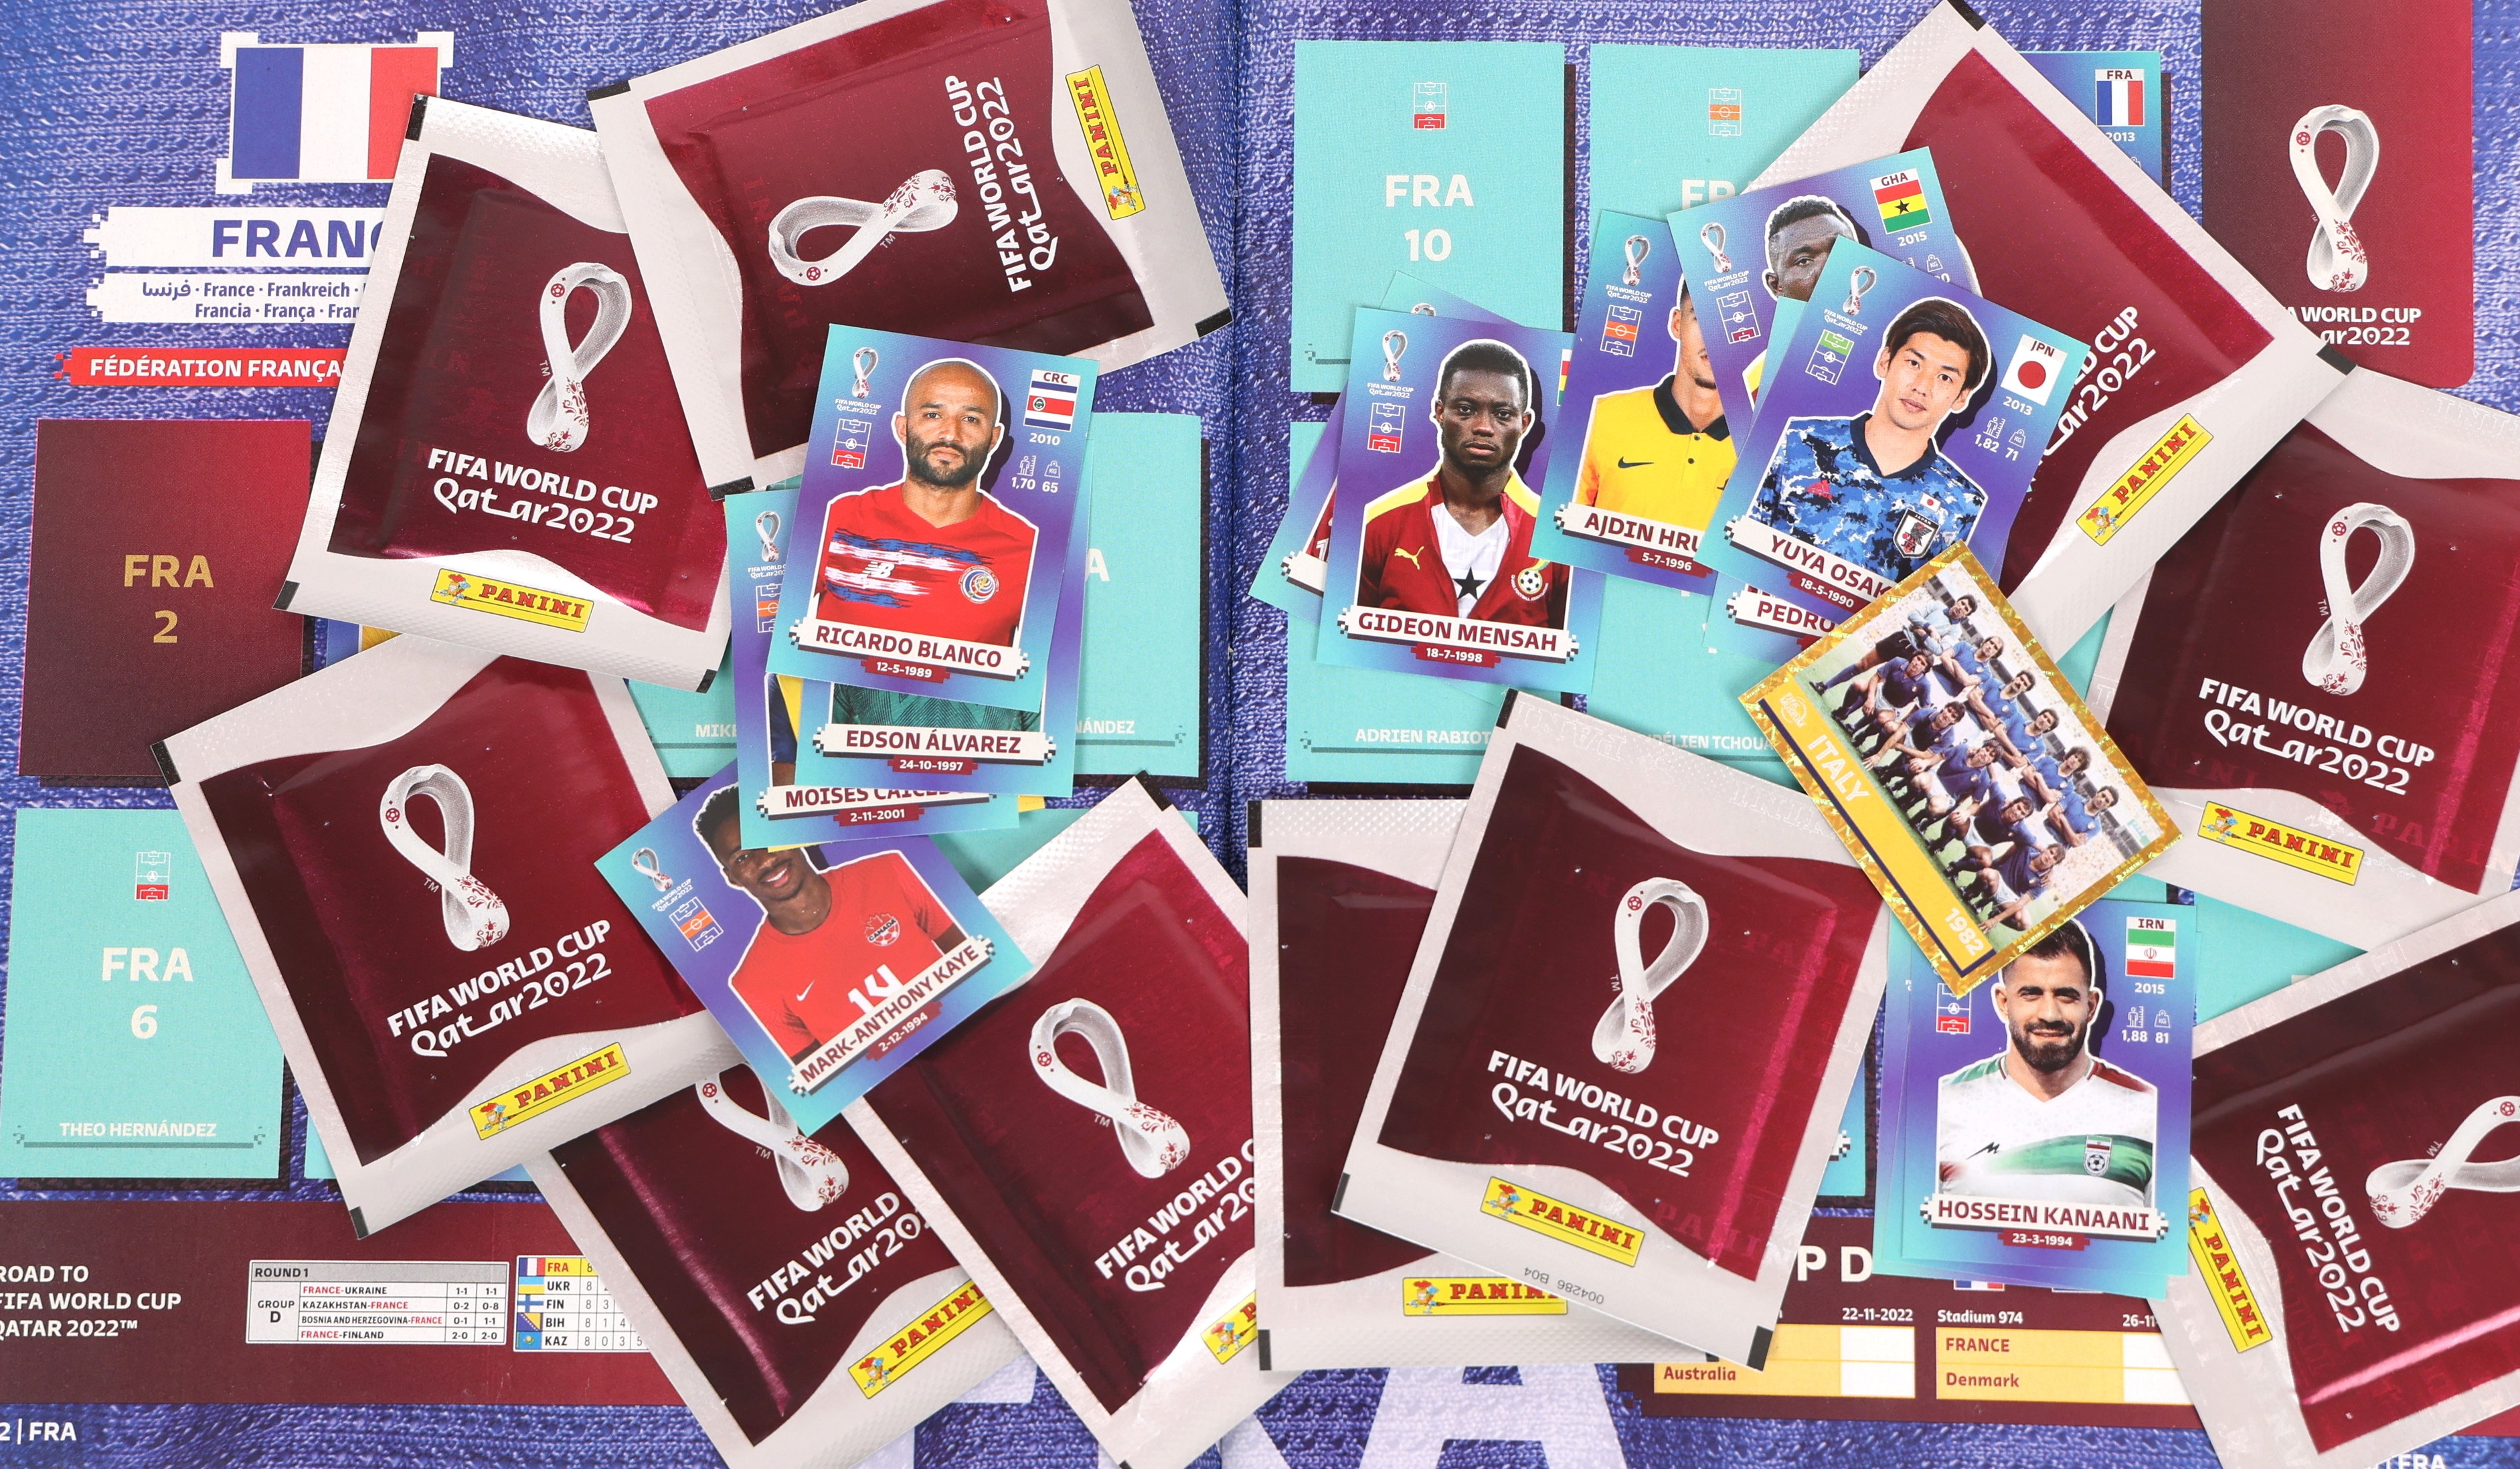 PANINI FOOT 2021 - images manquantes